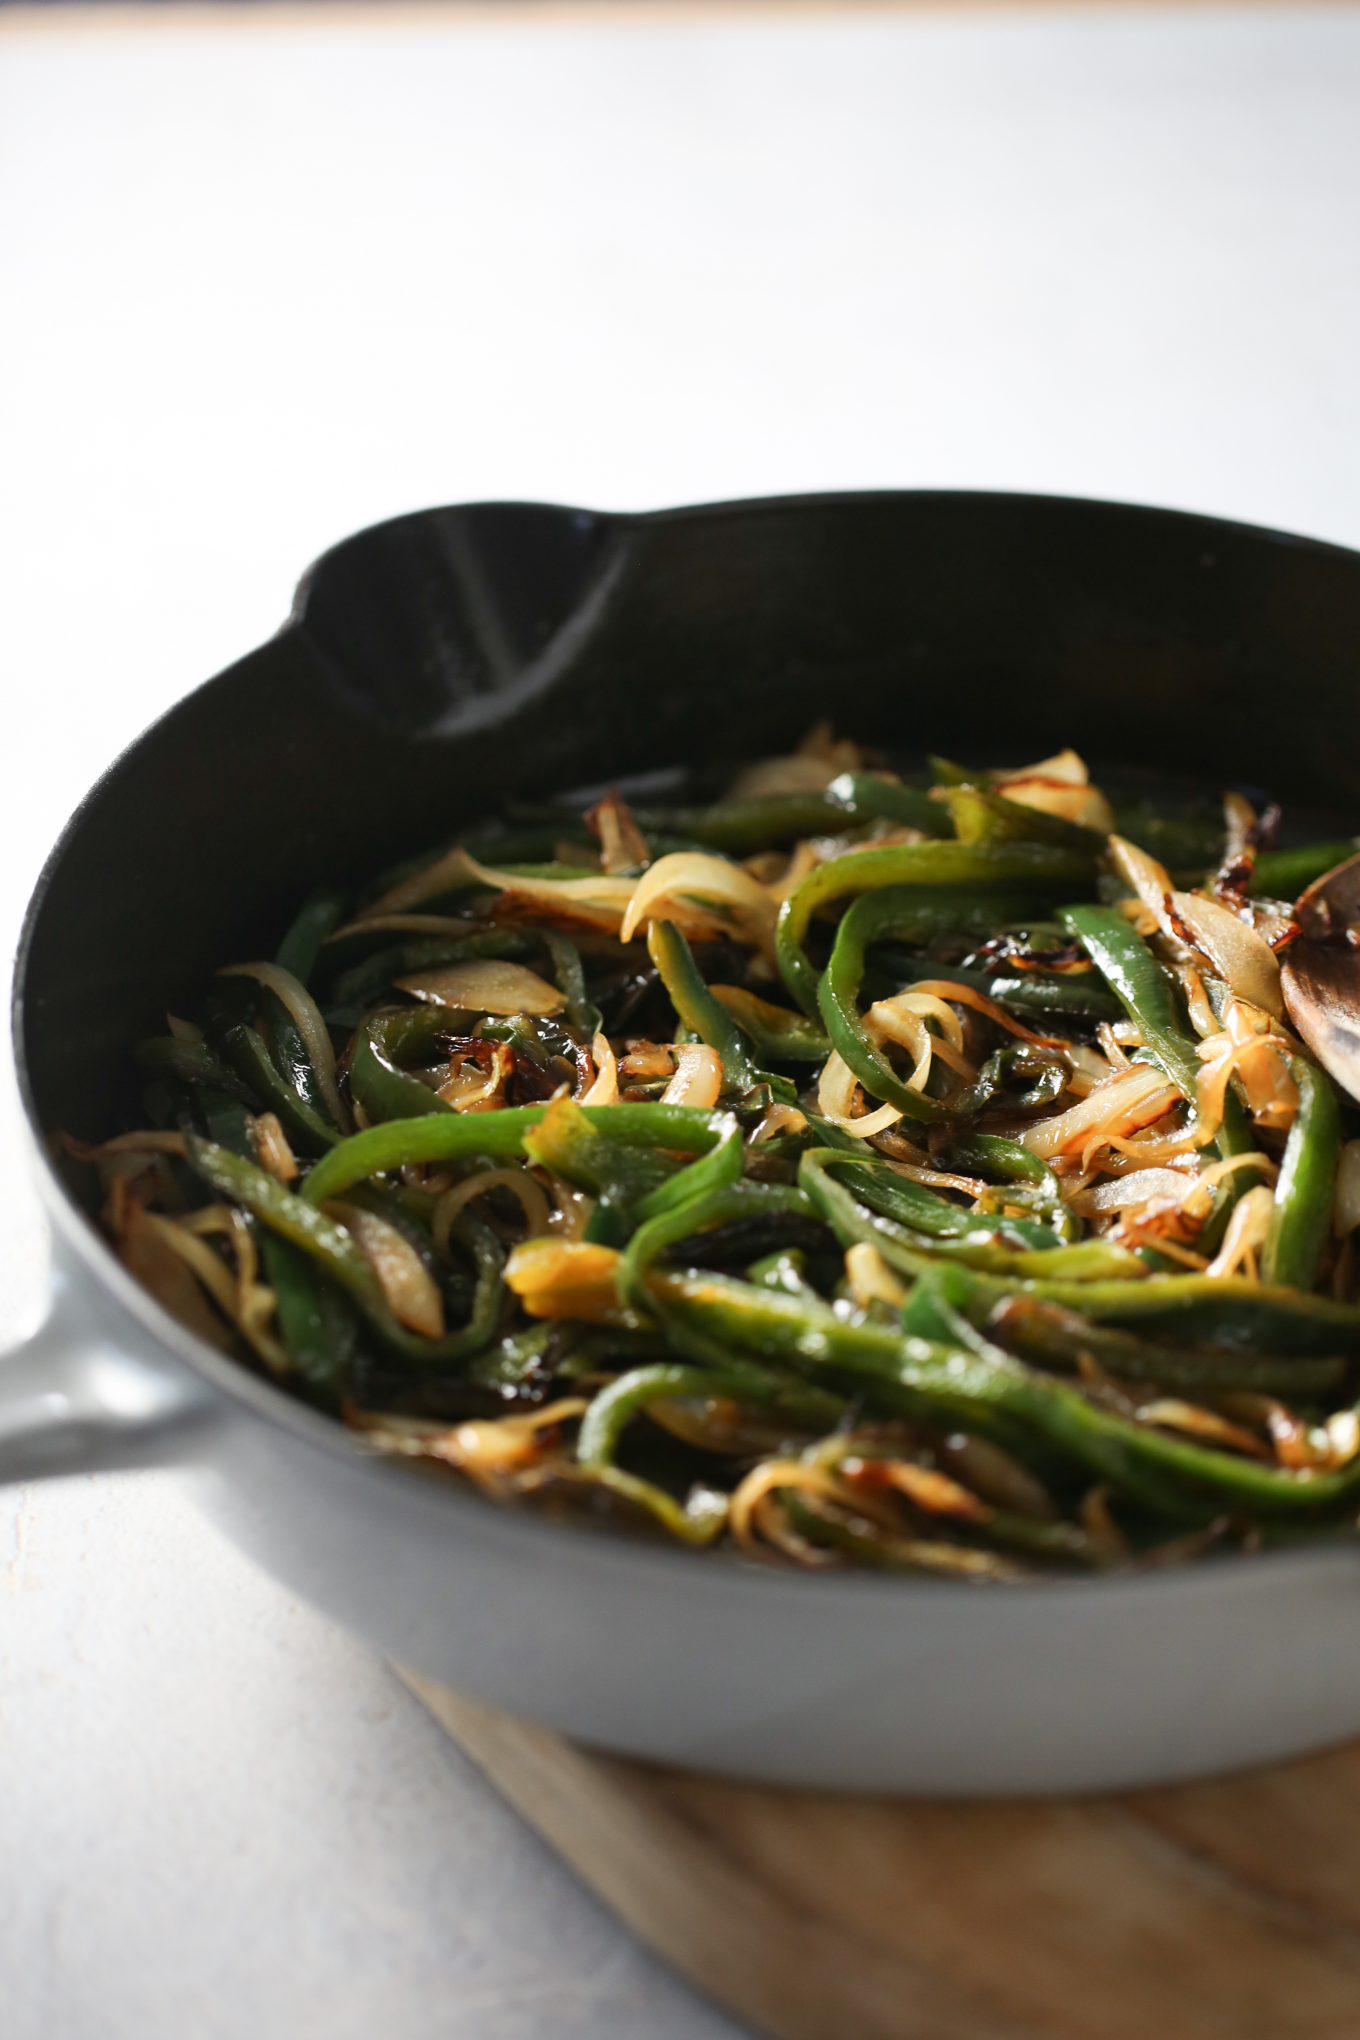 Rasted poblano peppers with onions in an iron cast skillet